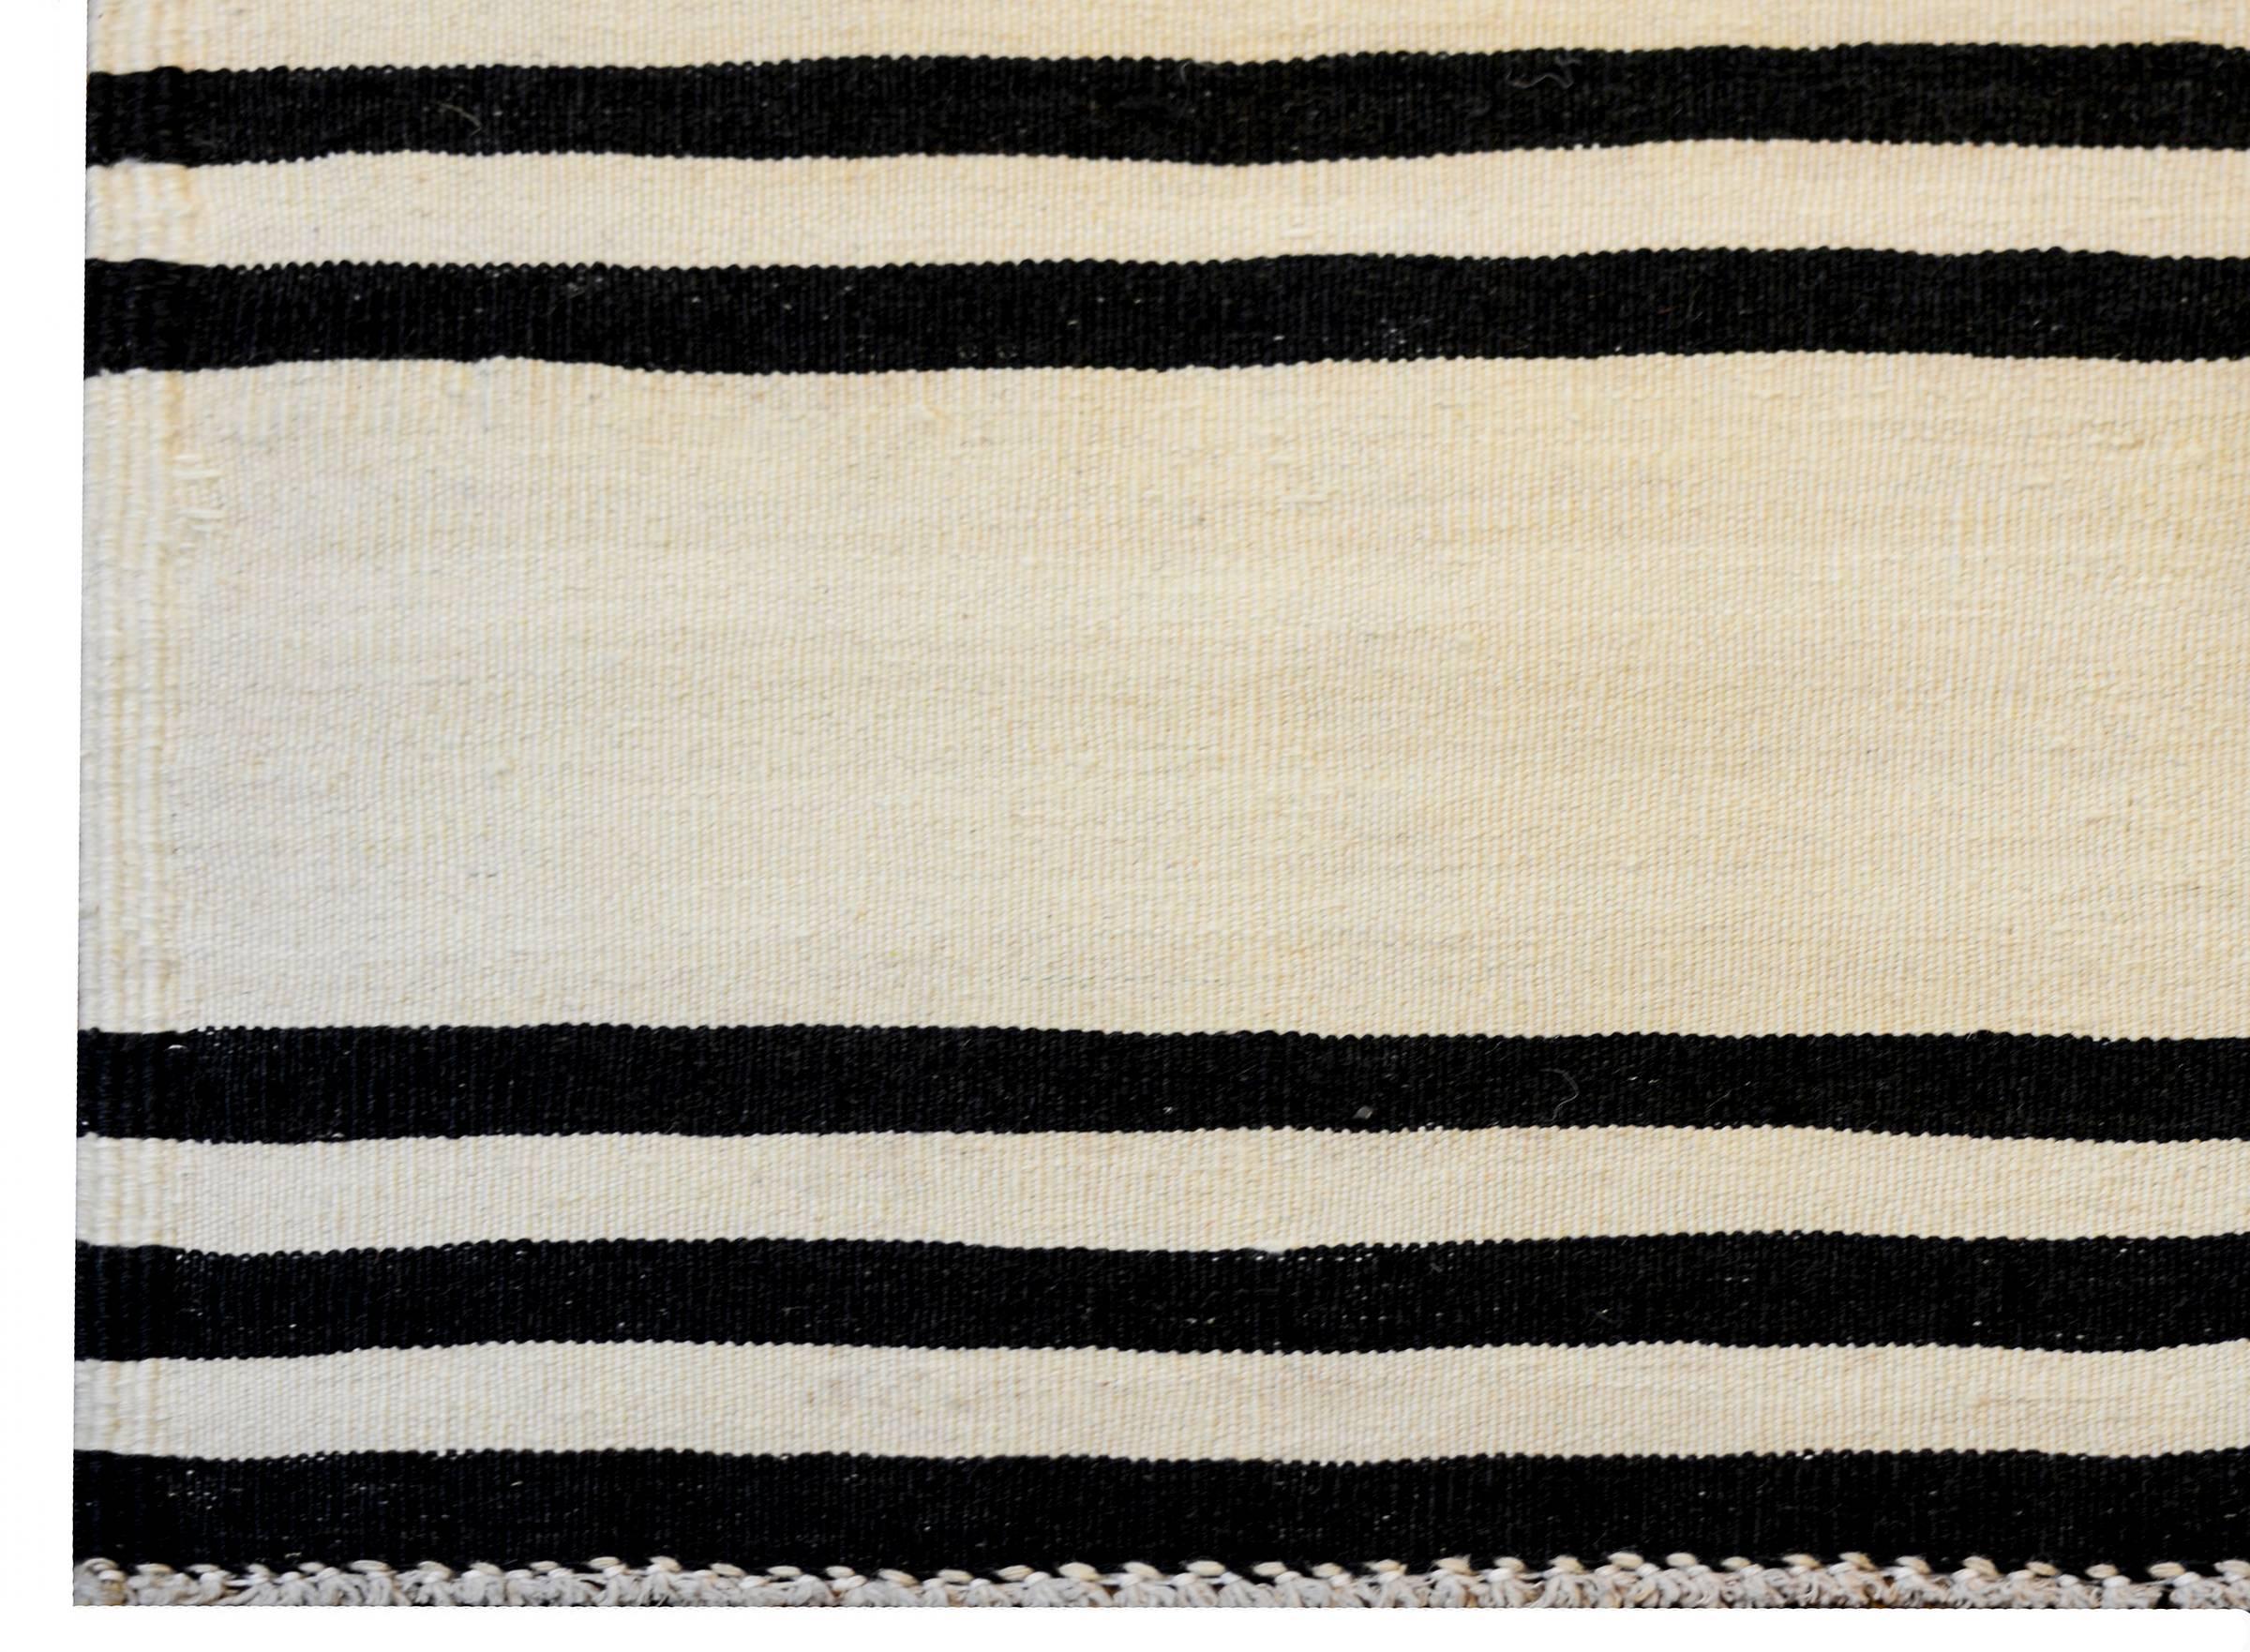 A wonderful early mid-20th century Persian Gabbeh Kilim runner with a bold horizontal stripe pattern with alternating black and natural wool stripes.